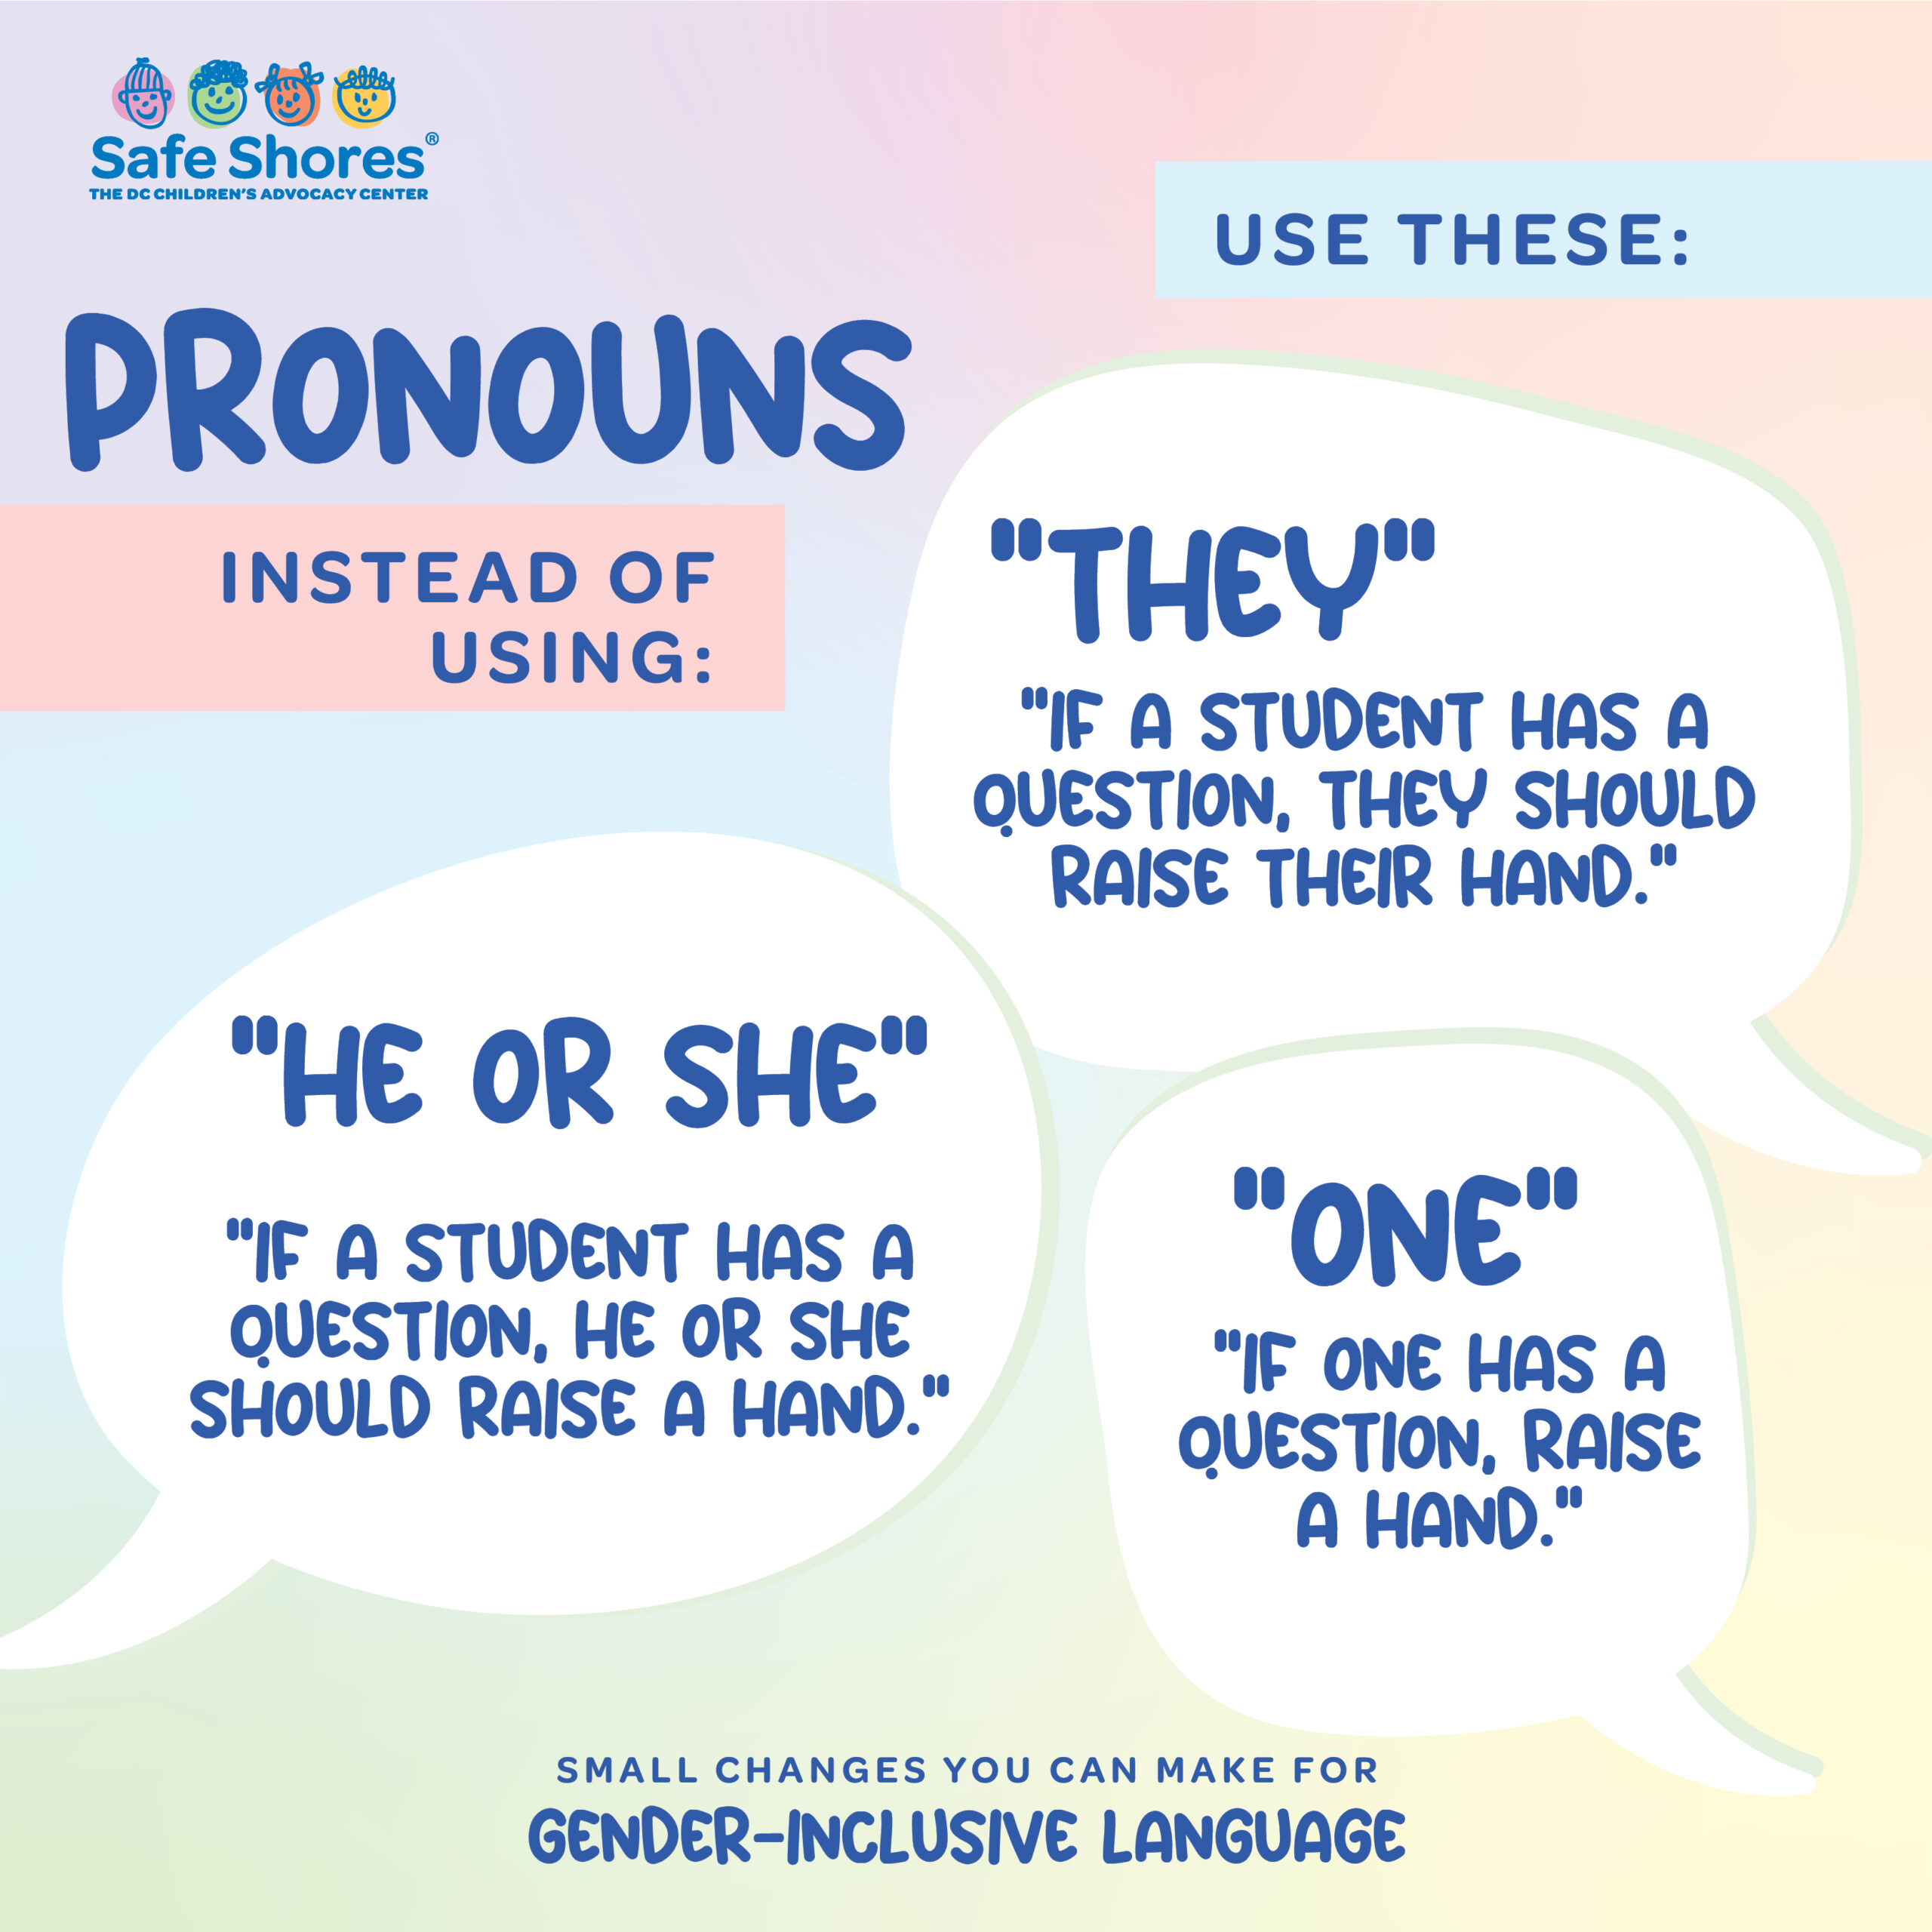 An image with speech bubbles on a pastel background. The image is titled "Pronouns" It says: "Instead of using "He or She" like "If a student has a question, he or she should raise a hand." Use these: "They" like "If a student has a question, they should raise their hand." and "One" like in "If one has a question, raise a hand." 